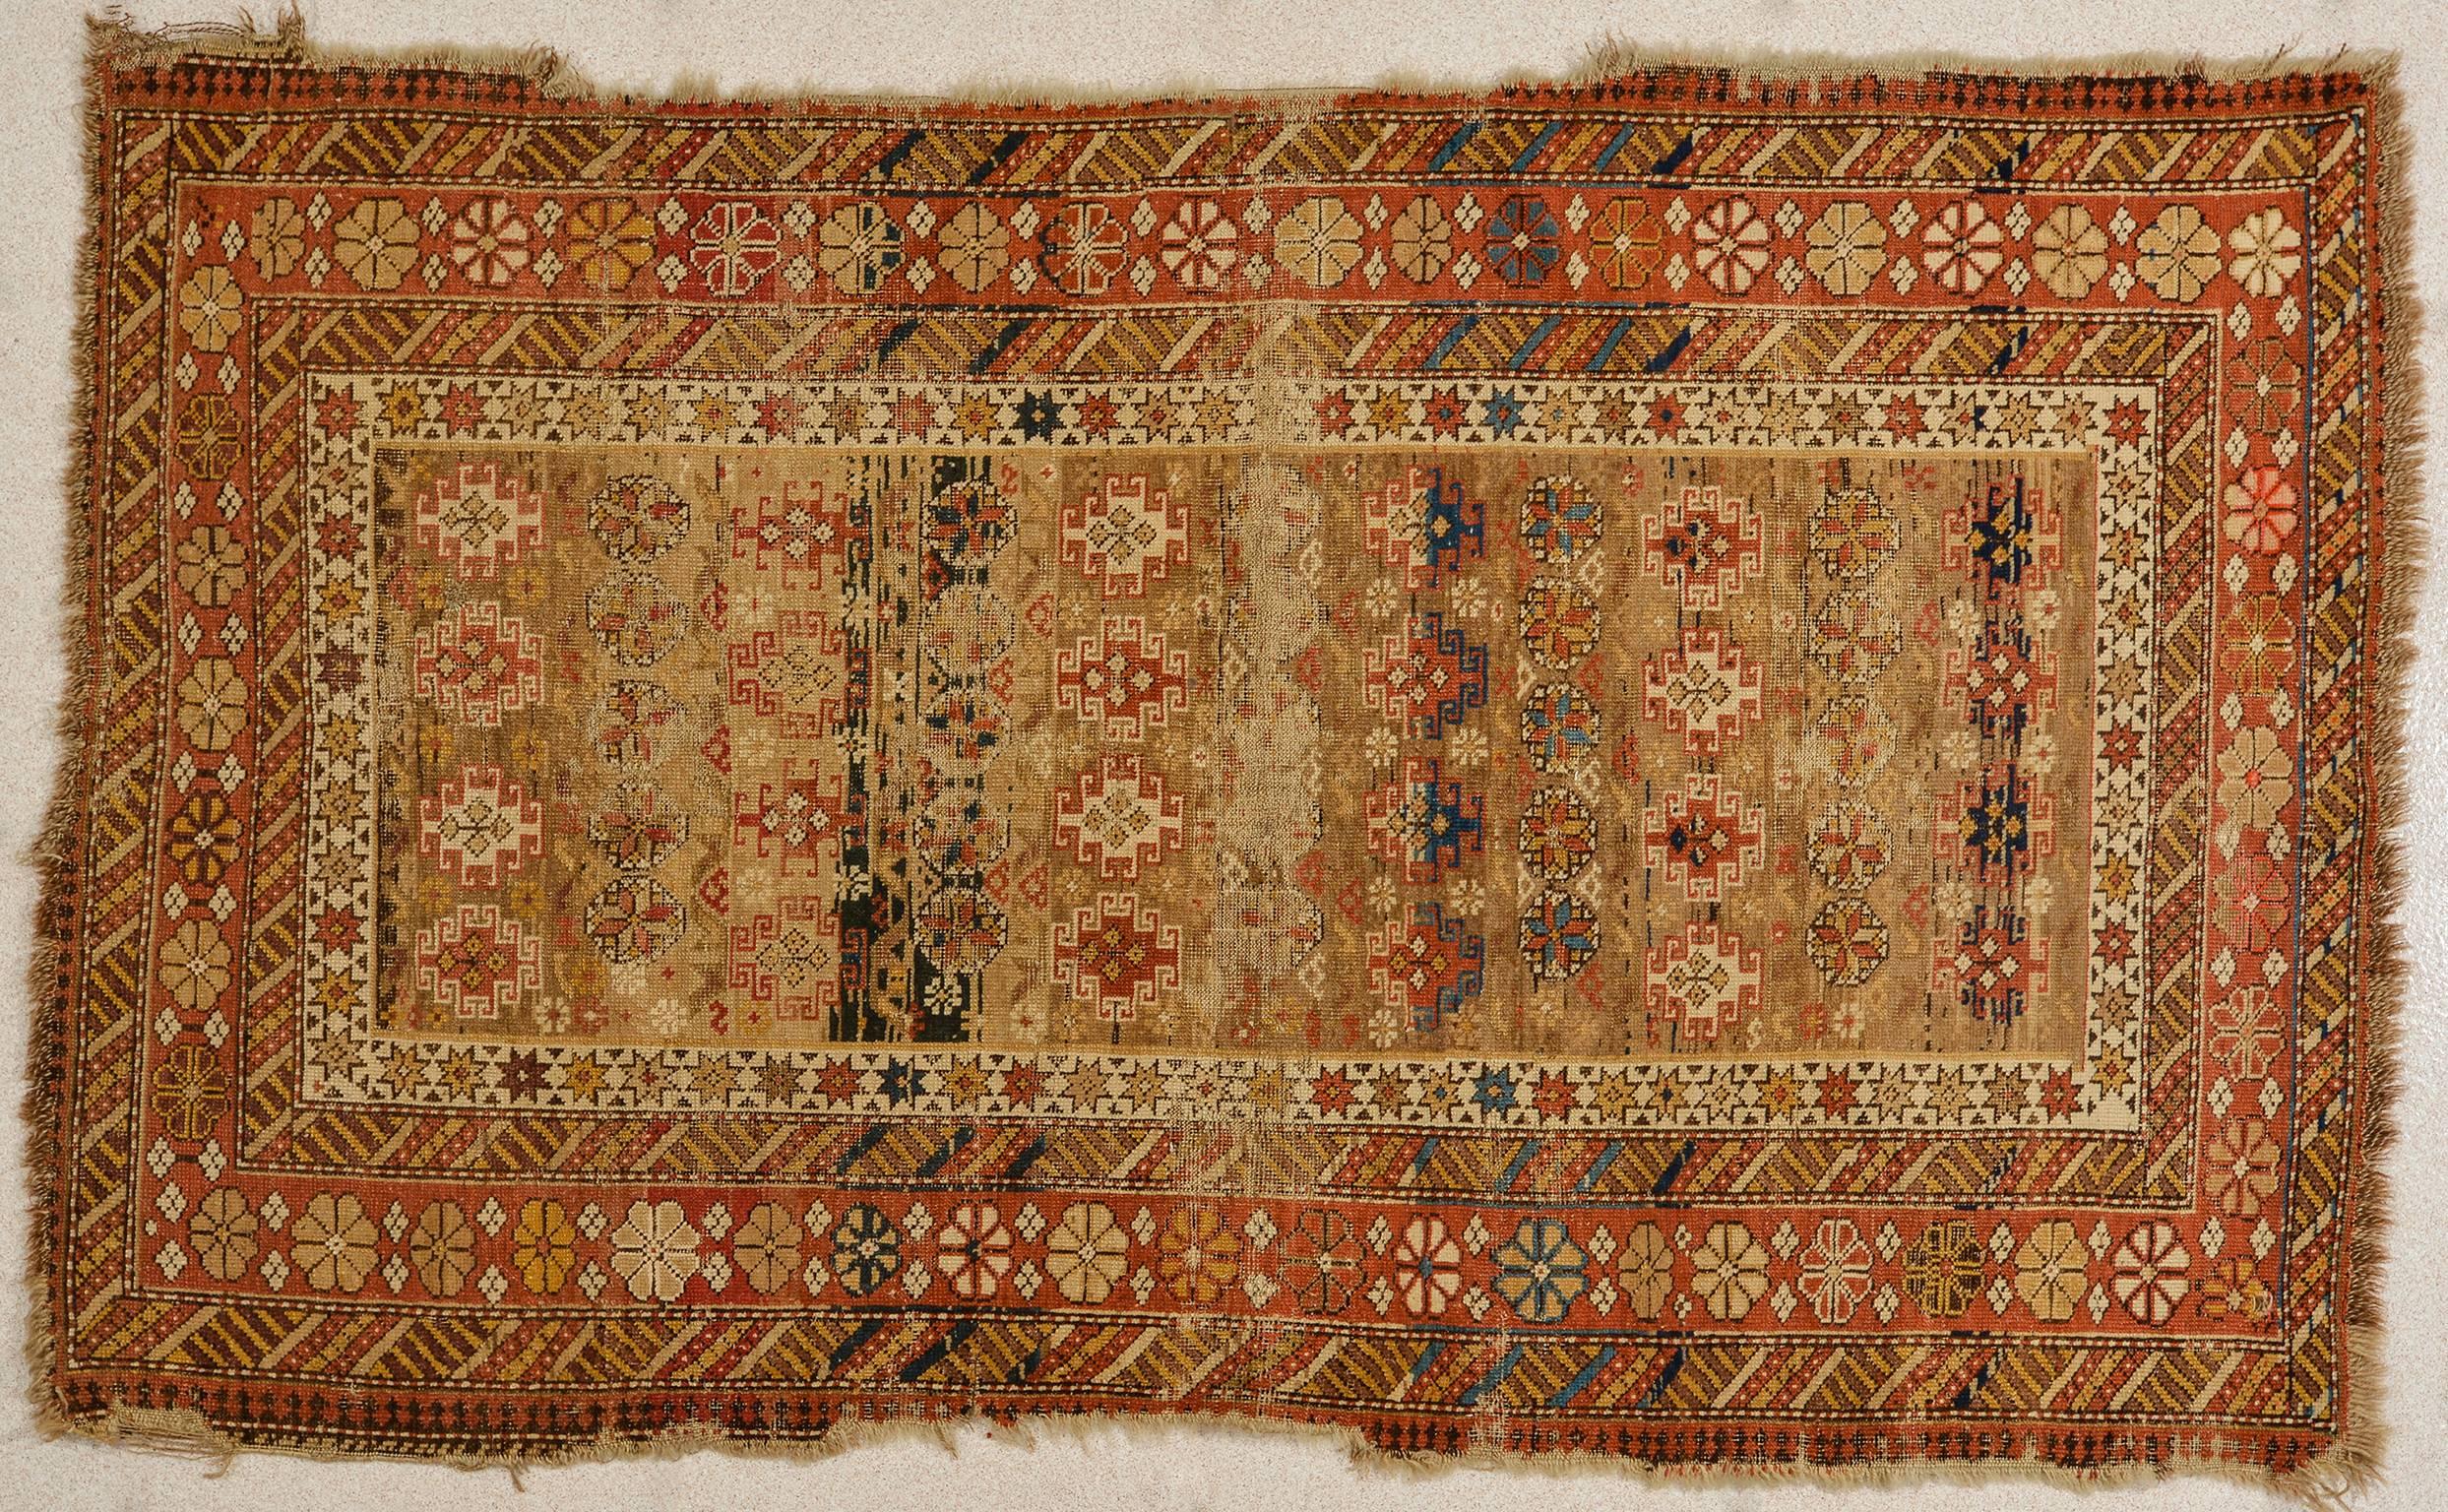 Rare design of the Chi Chi motif for this antique Shirvan rug fragment, suitable for wall also: already prepared to adhere (with velcro) to a frame or a wall panel. Beautiful elegant camel color -
Nr. 1337.